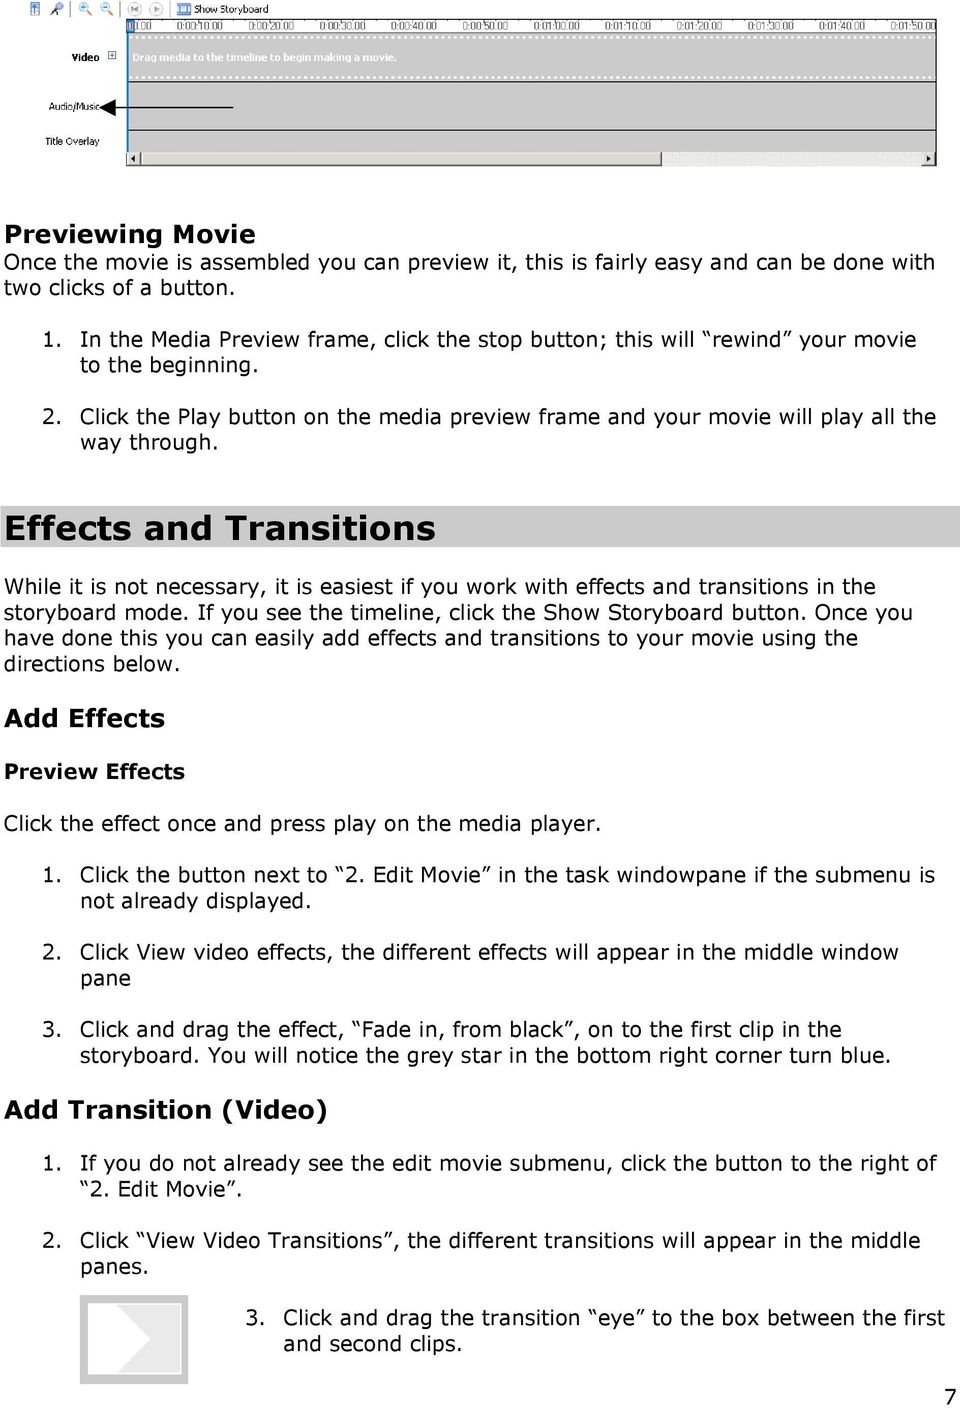 Effects and Transitions While it is not necessary, it is easiest if you work with effects and transitions in the storyboard mode. If you see the timeline, click the Show Storyboard button.